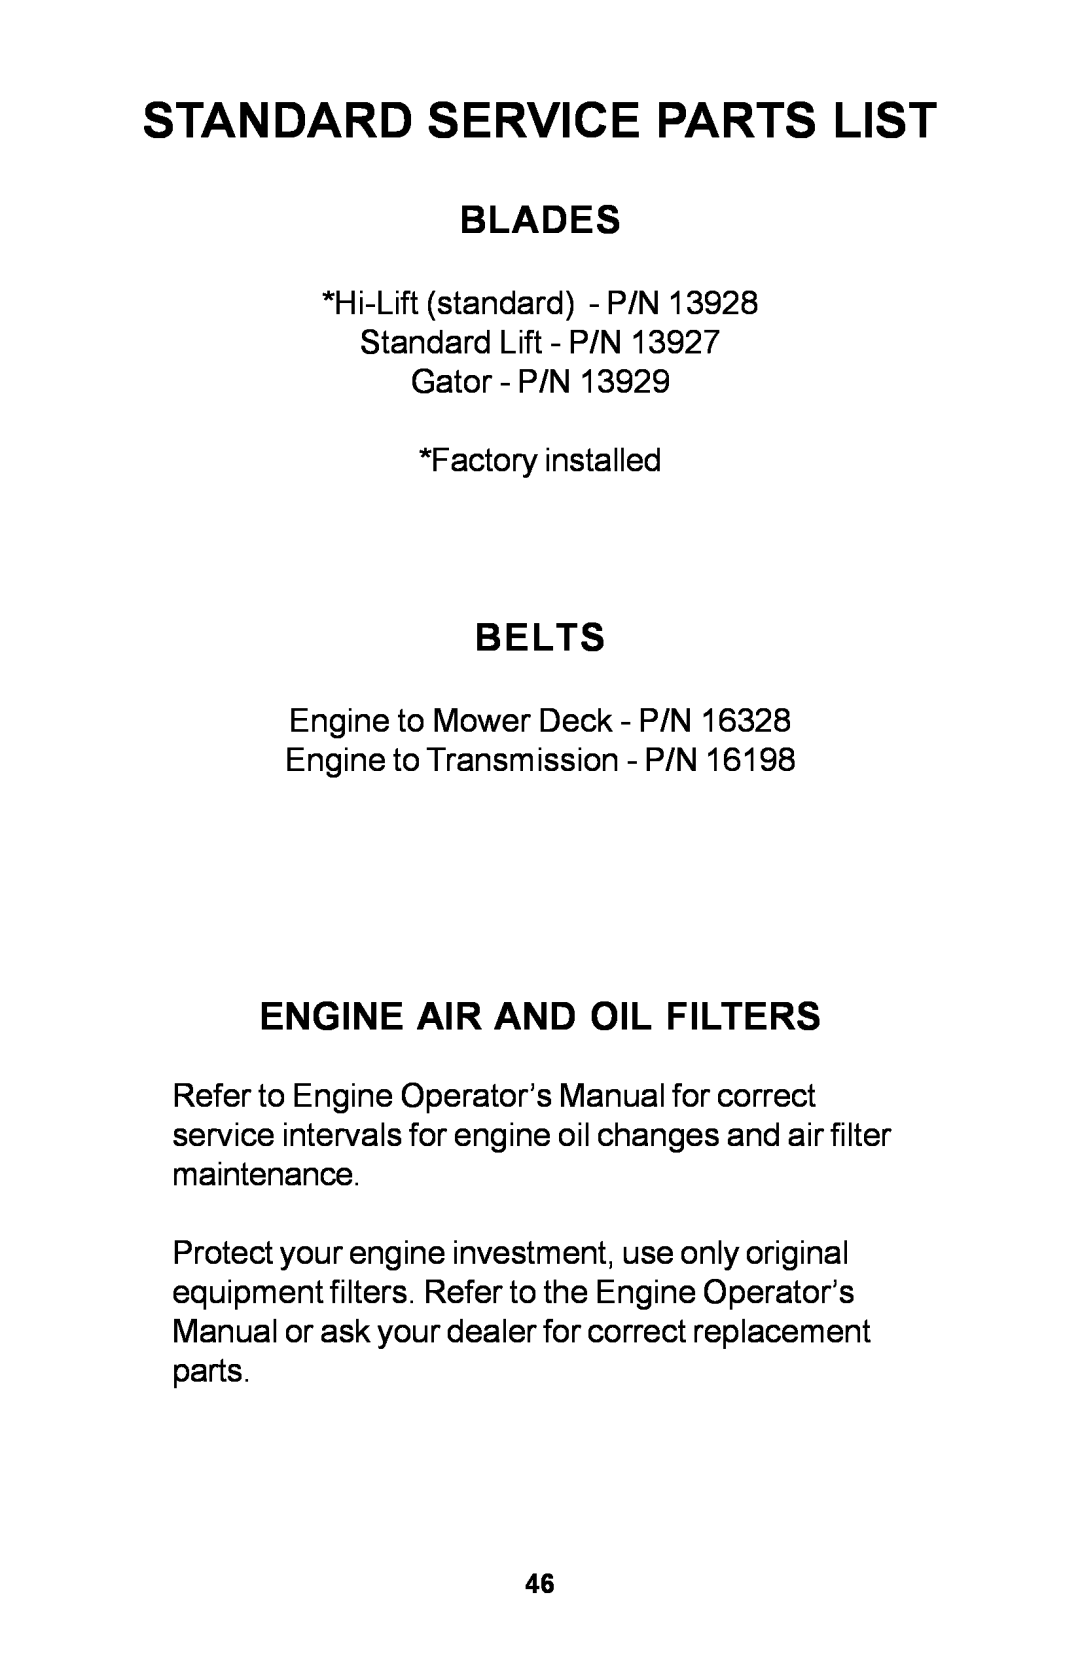 Dixon 30 manual Standard Service Parts List, Blades, Engine Air And Oil Filters, Belts 